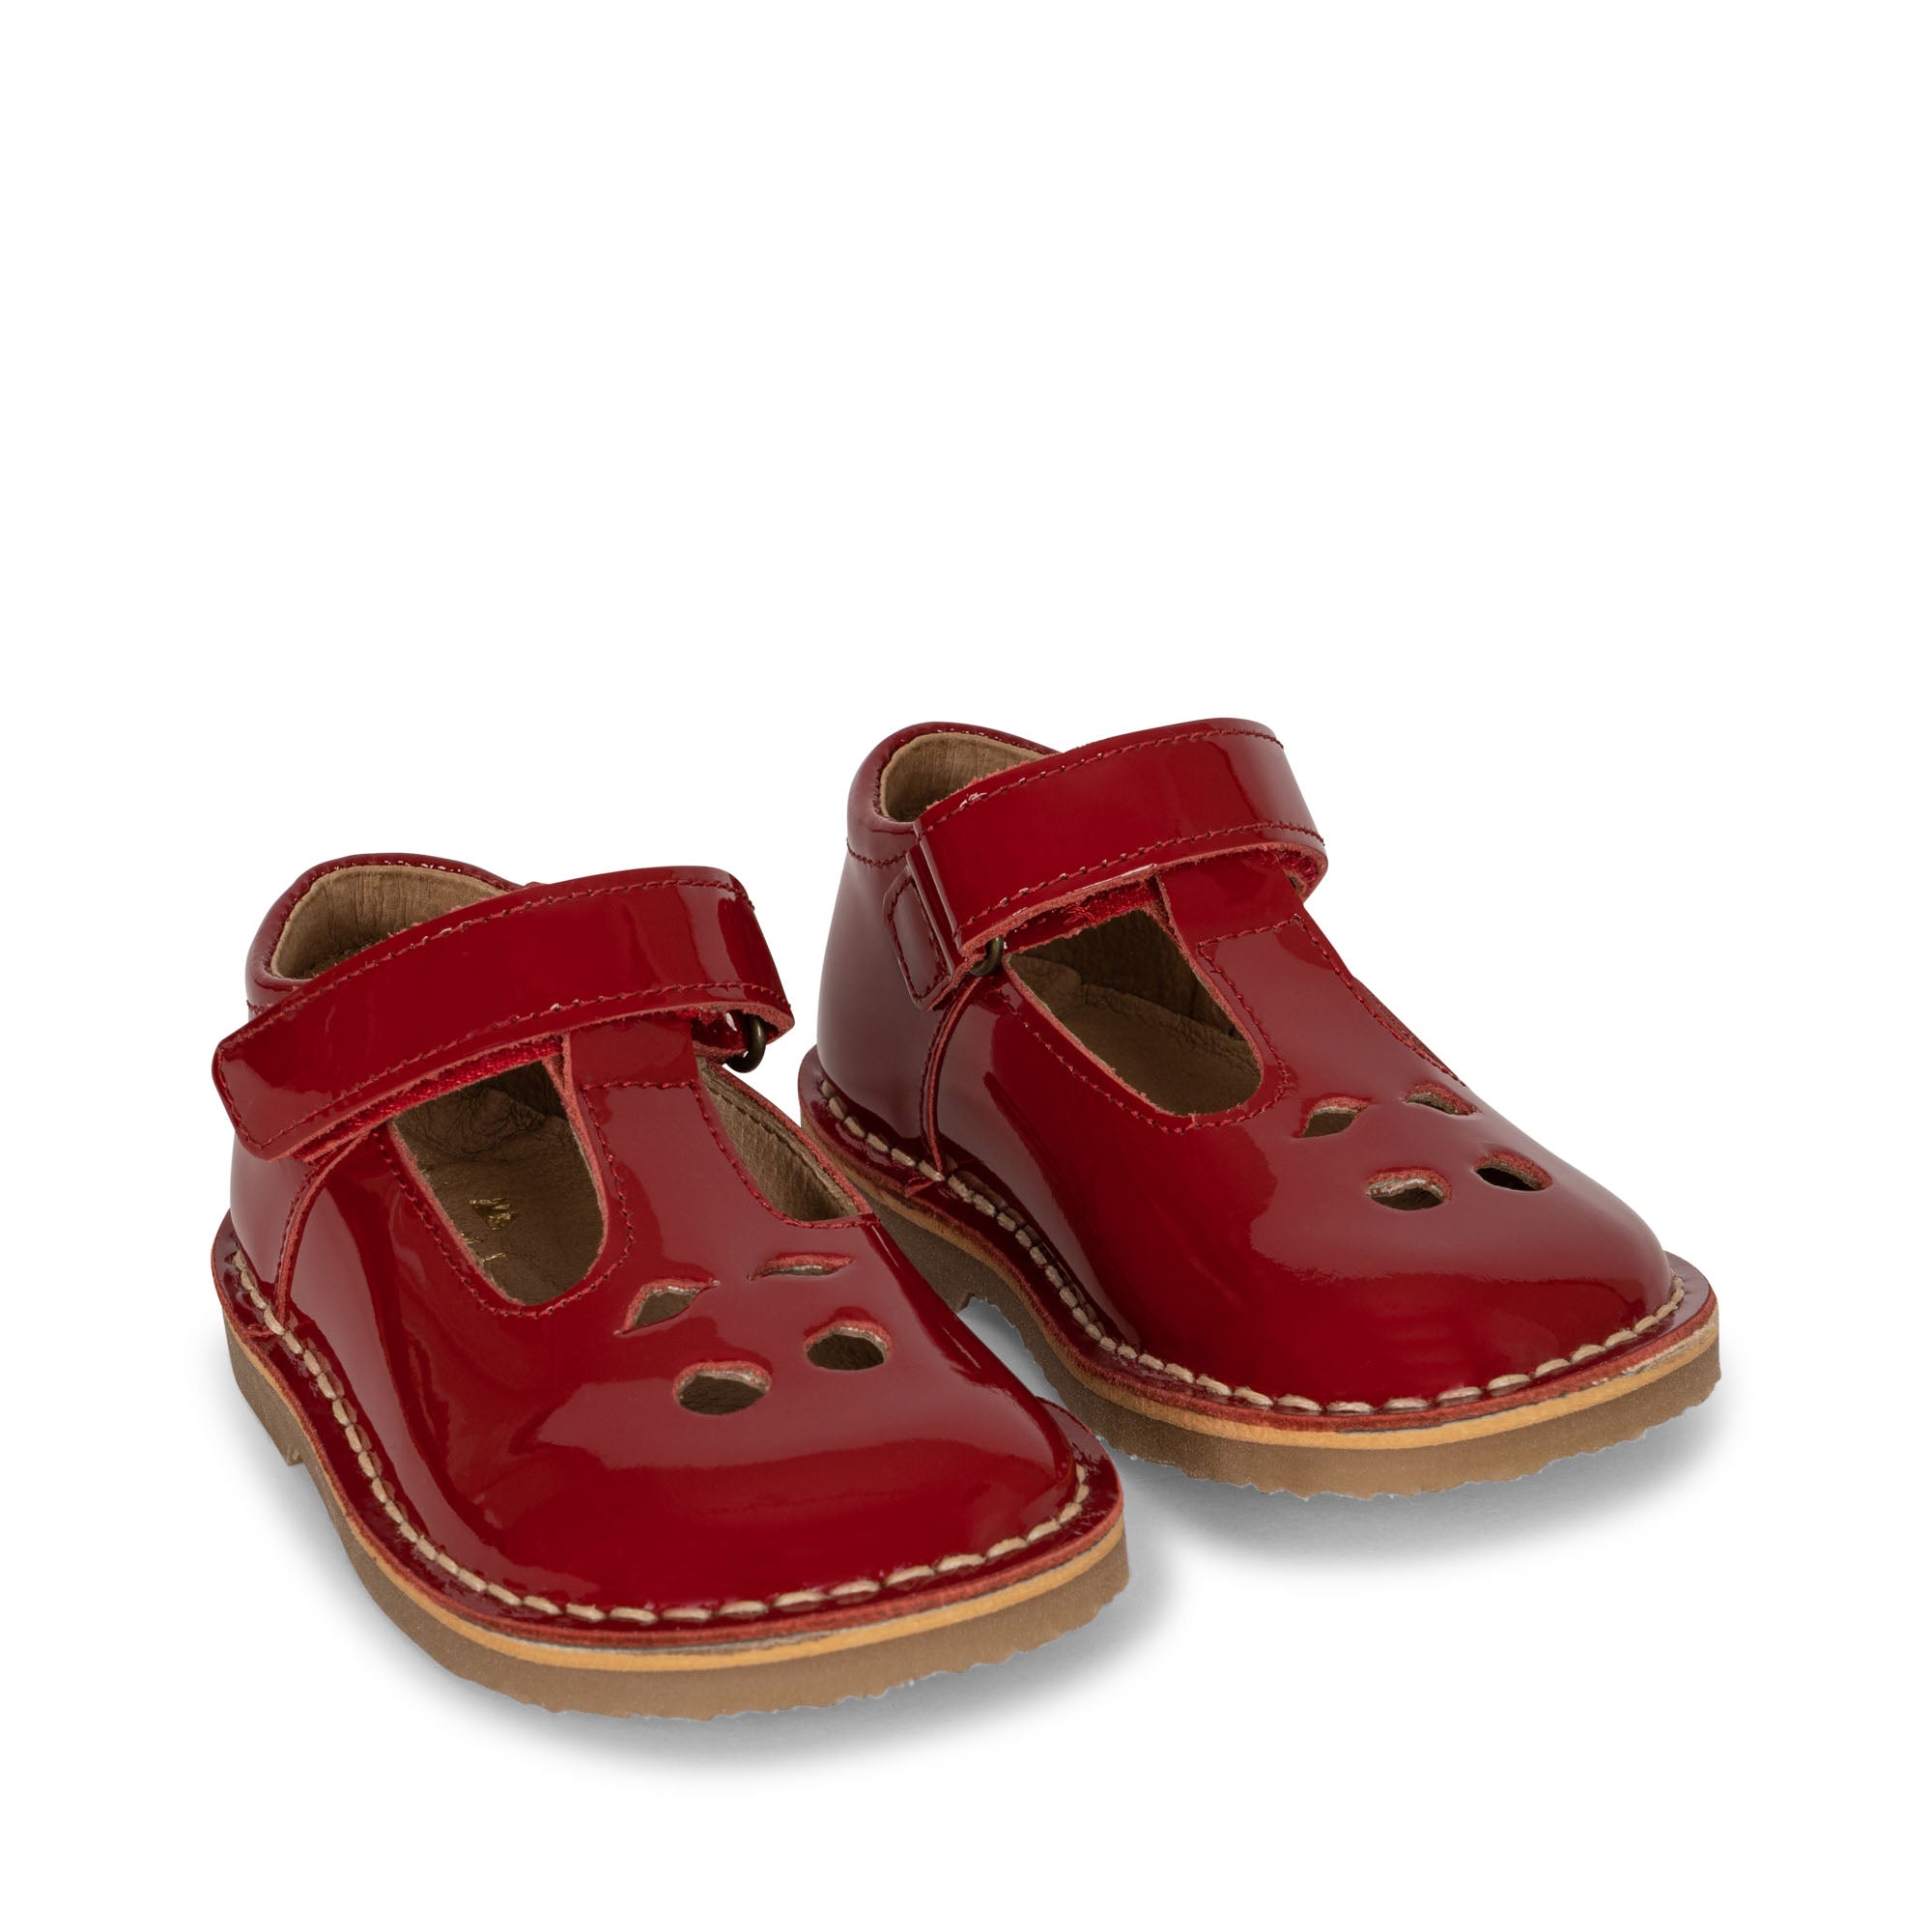 Konges Sløjd A/S CHOU SANDALS PATENT LEATHER SHOES DEEP RED